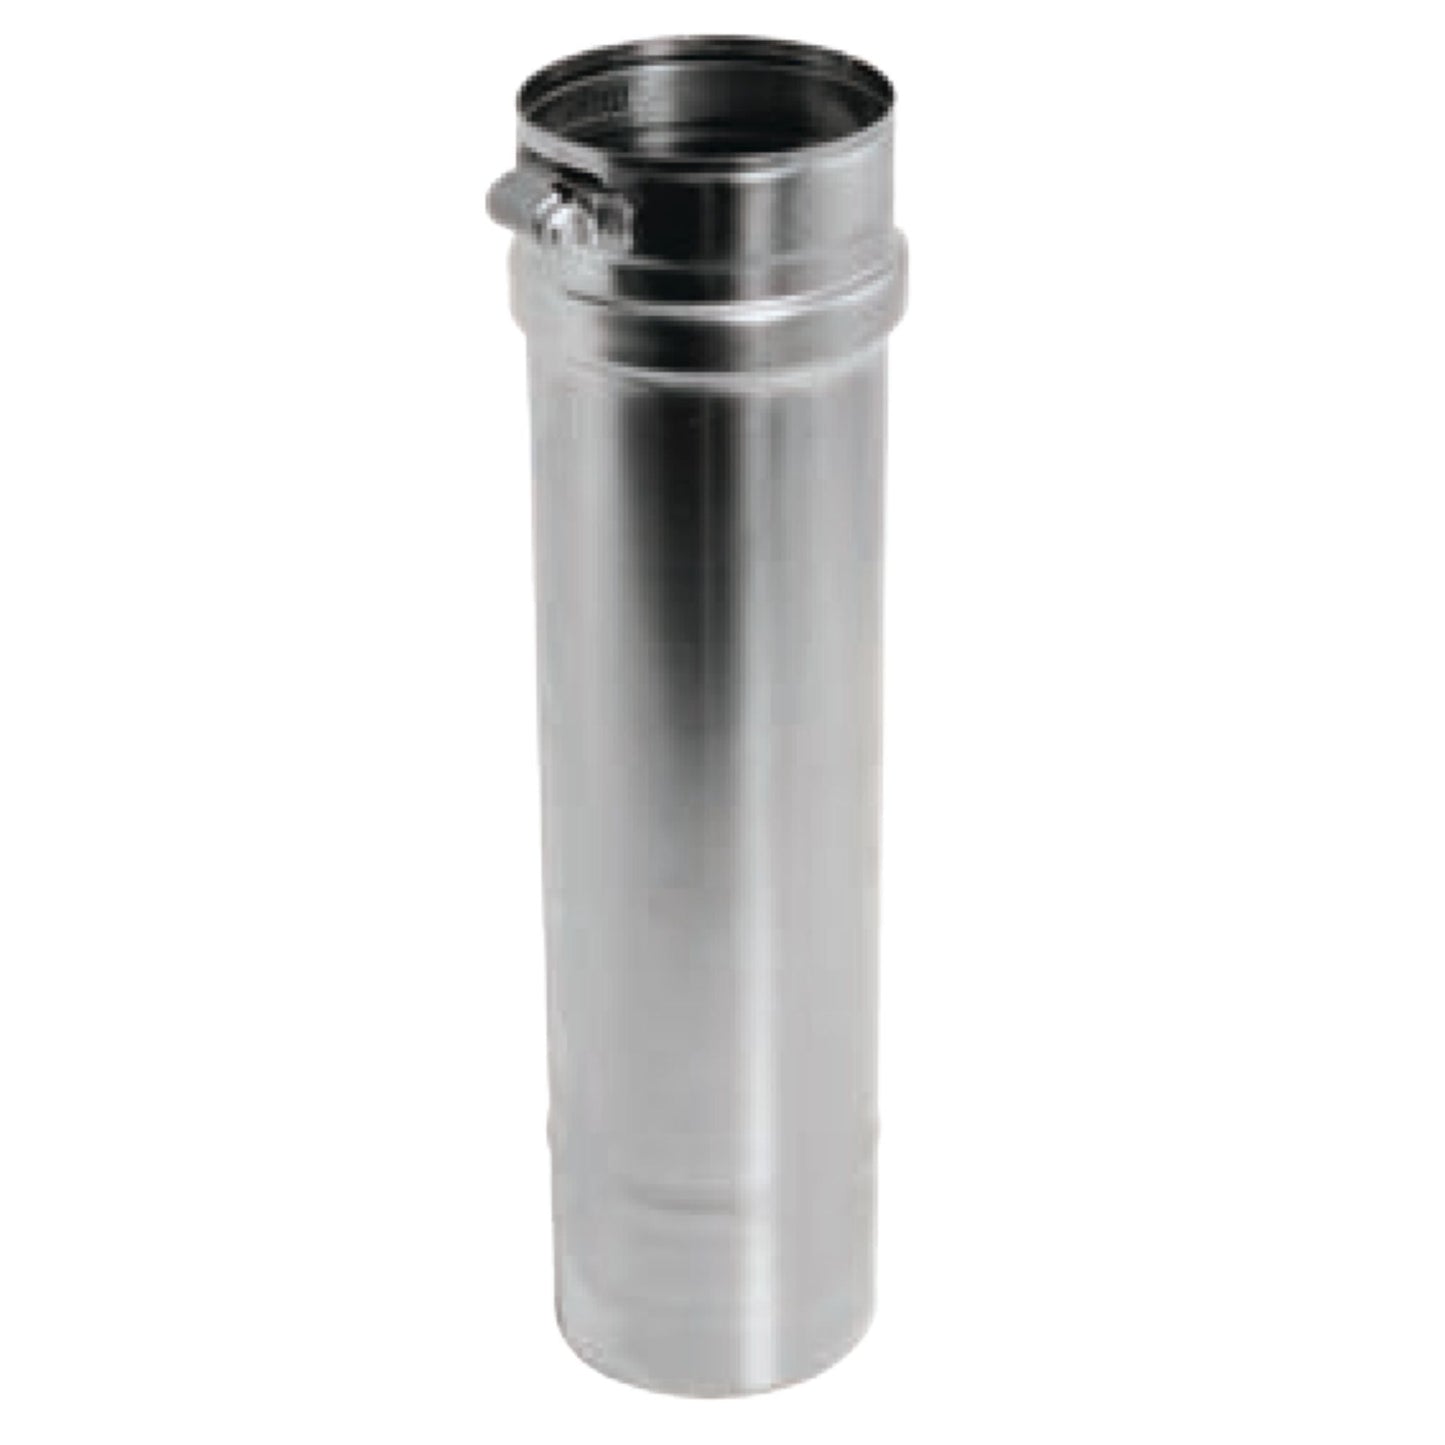 DuraVent FasNSeal 16" x 18" 316L Stainless Steel Vent Length